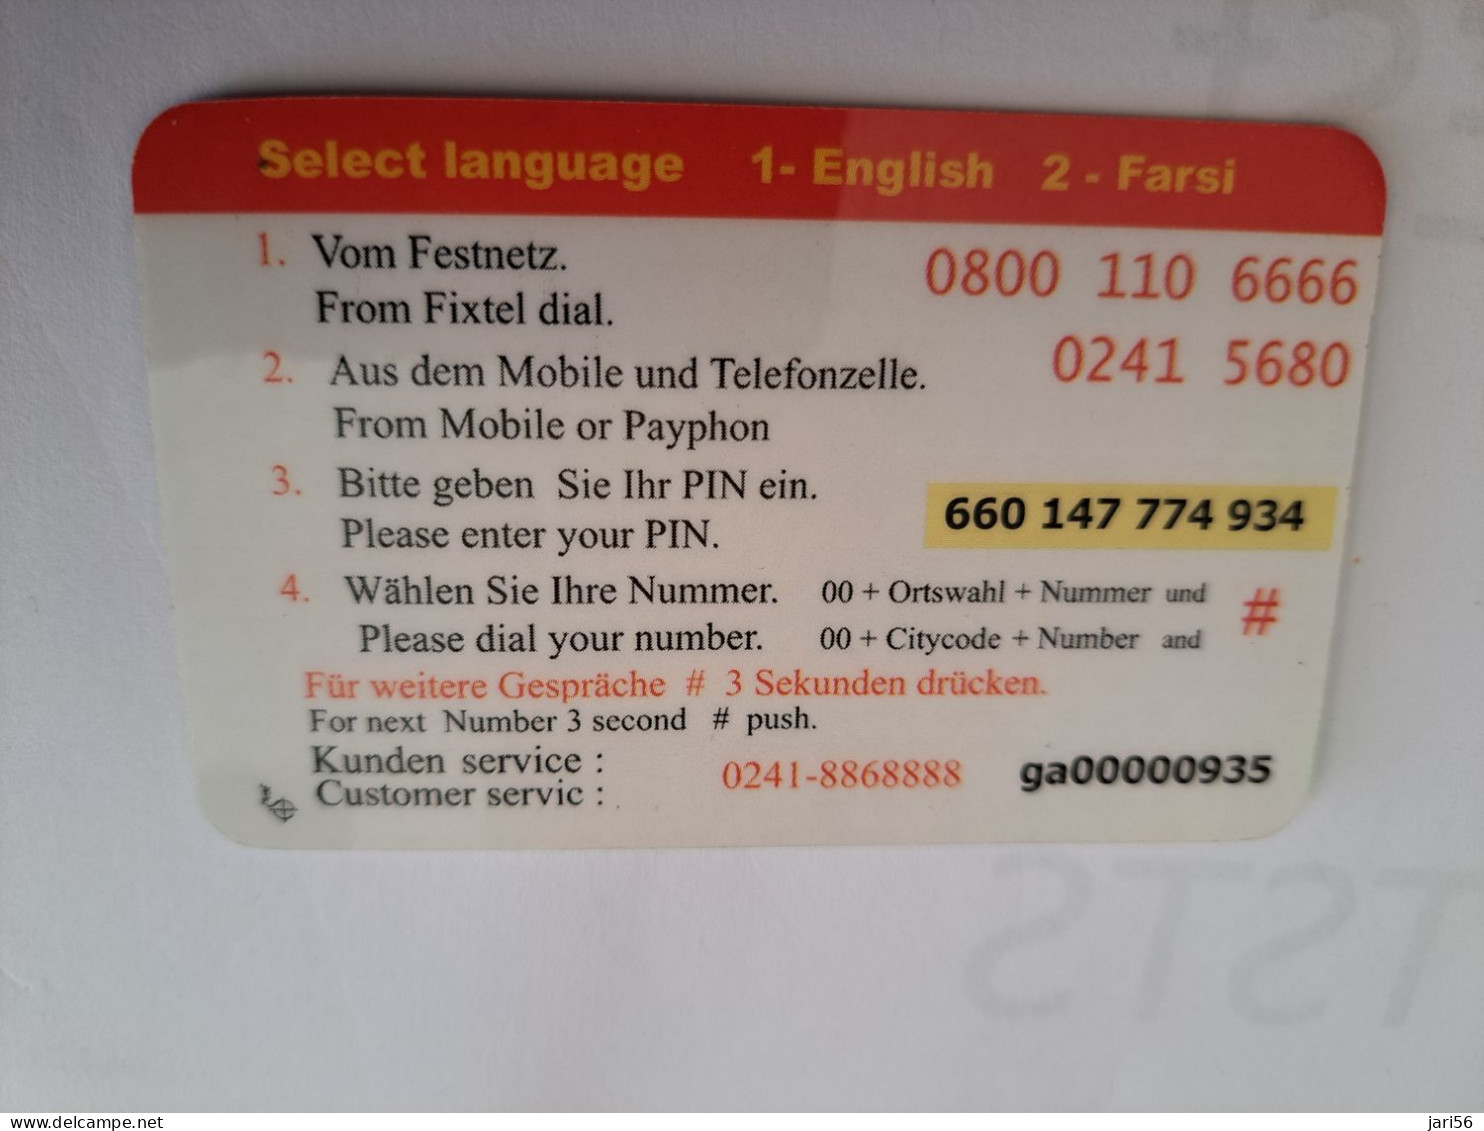 DUITSLAND/GERMANY  € 5,- / PERSOPOLIS TEL / LION HEAD   ON CARD        Fine Used  PREPAID  **16532** - [2] Mobile Phones, Refills And Prepaid Cards